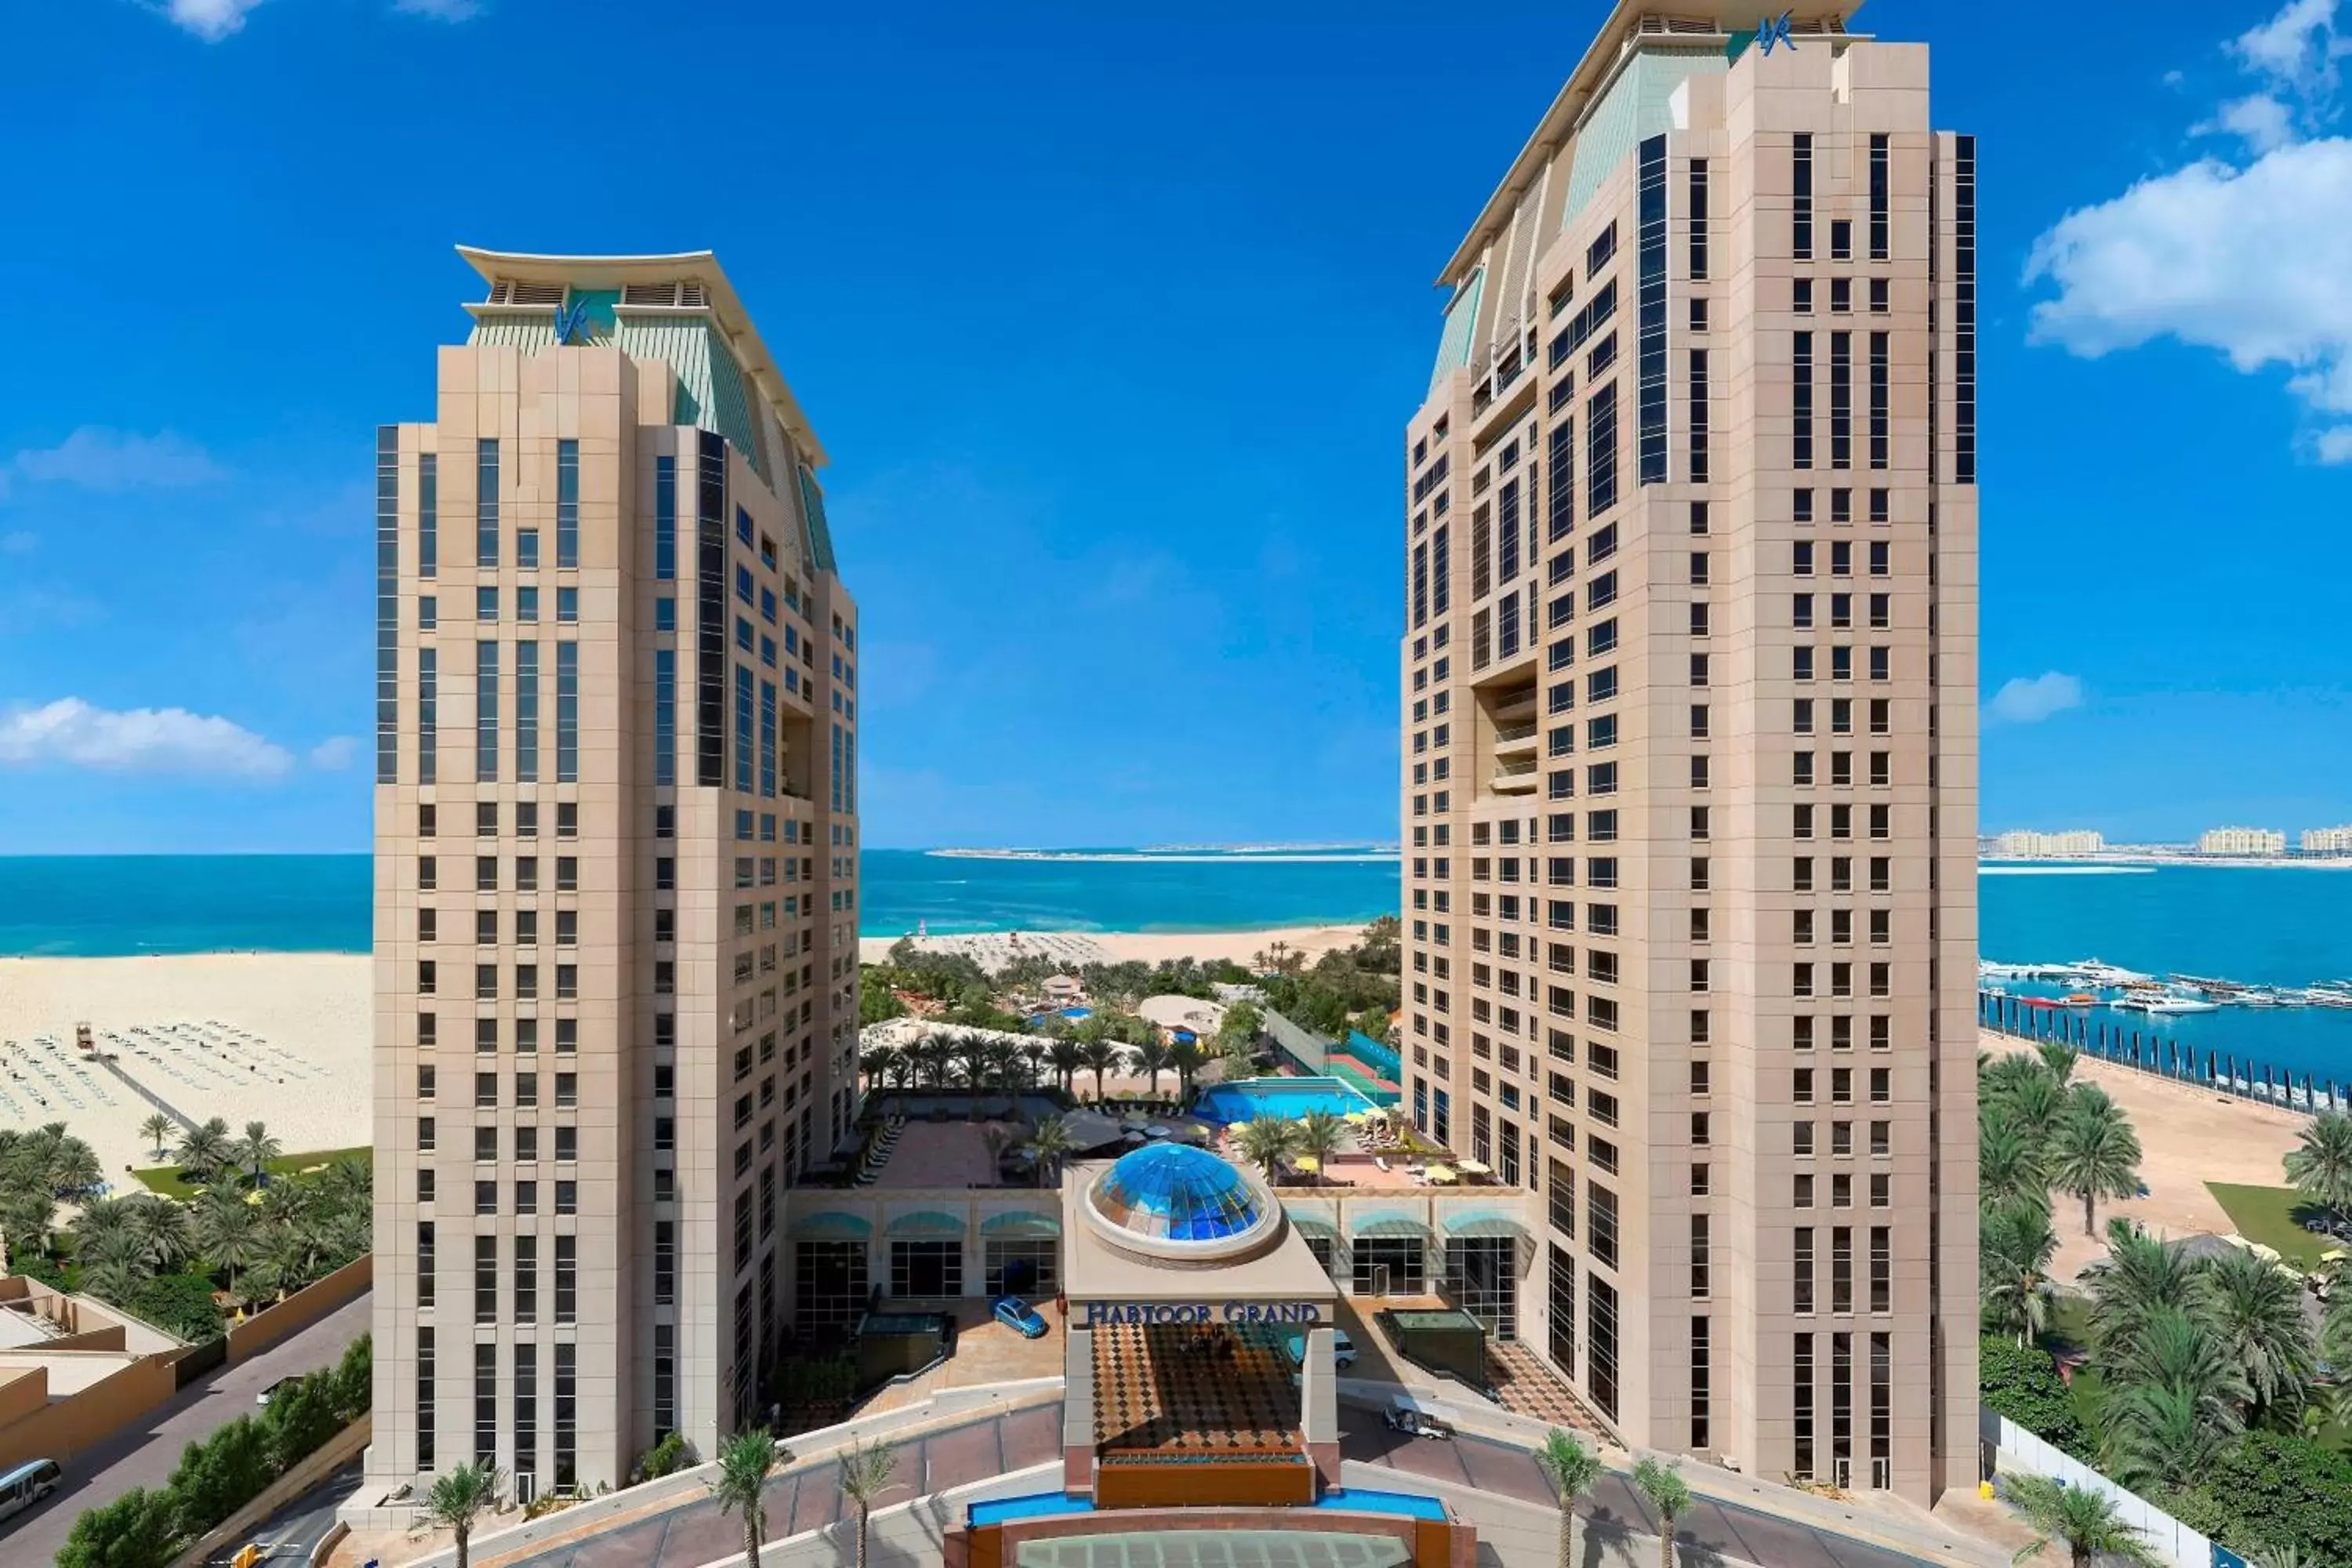 Property building in Habtoor Grand Resort, Autograph Collection